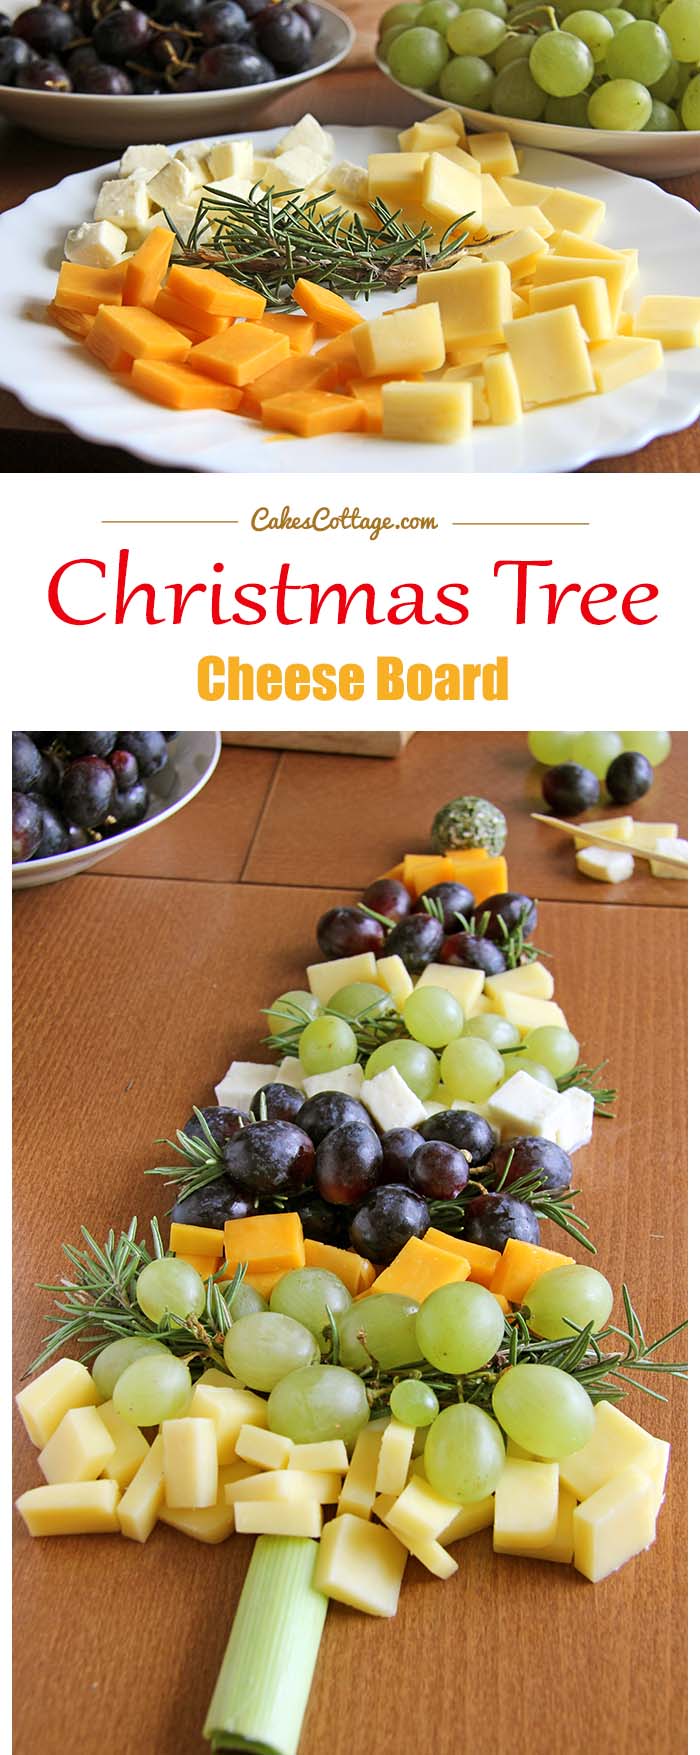 Christmas Tree Cheese Board - Cakescottage